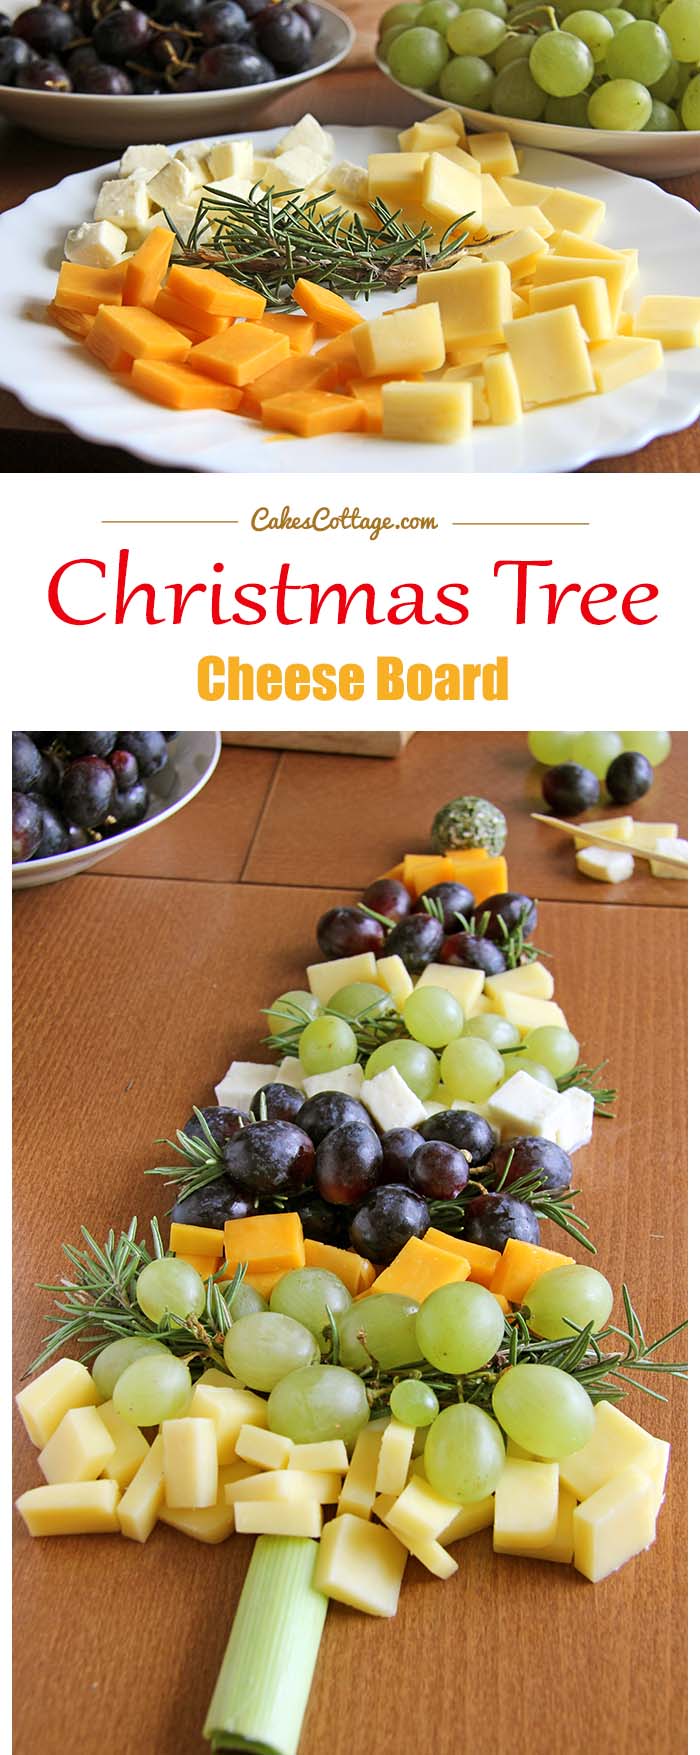 Christmas Tree Cheese Board - Cakescottage